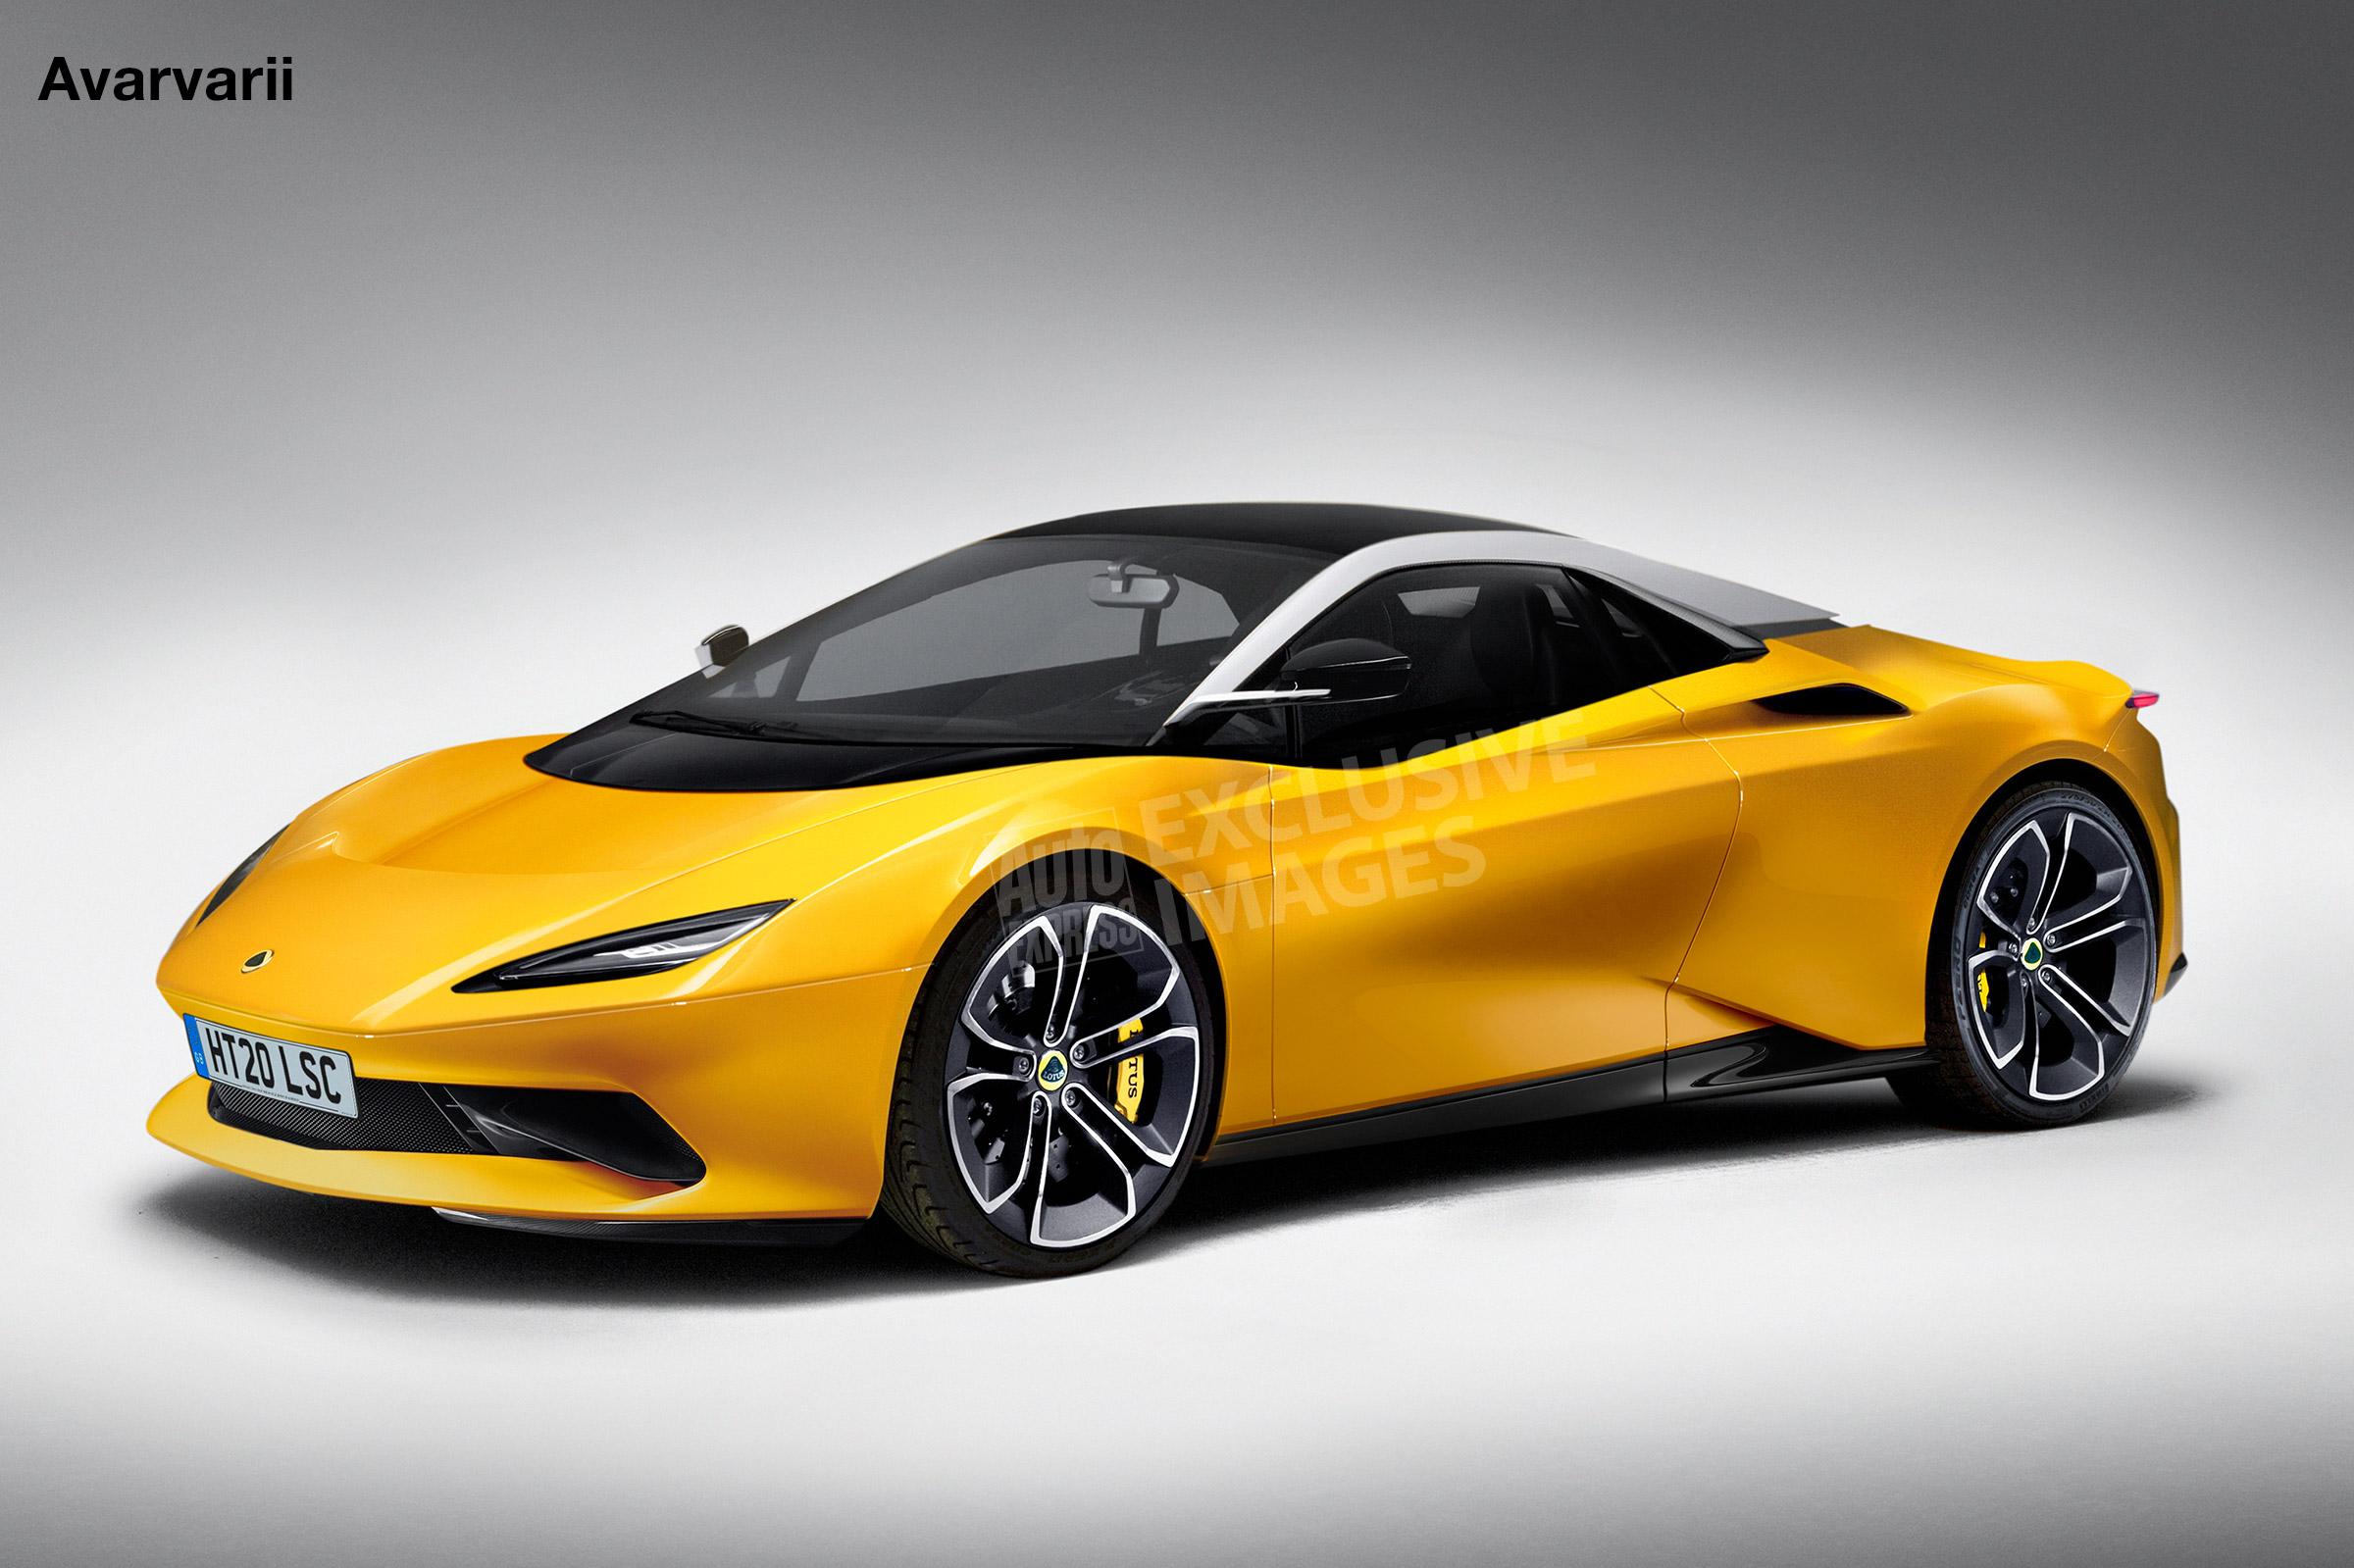 New 2020 Lotus sports car to be brand's first electrified